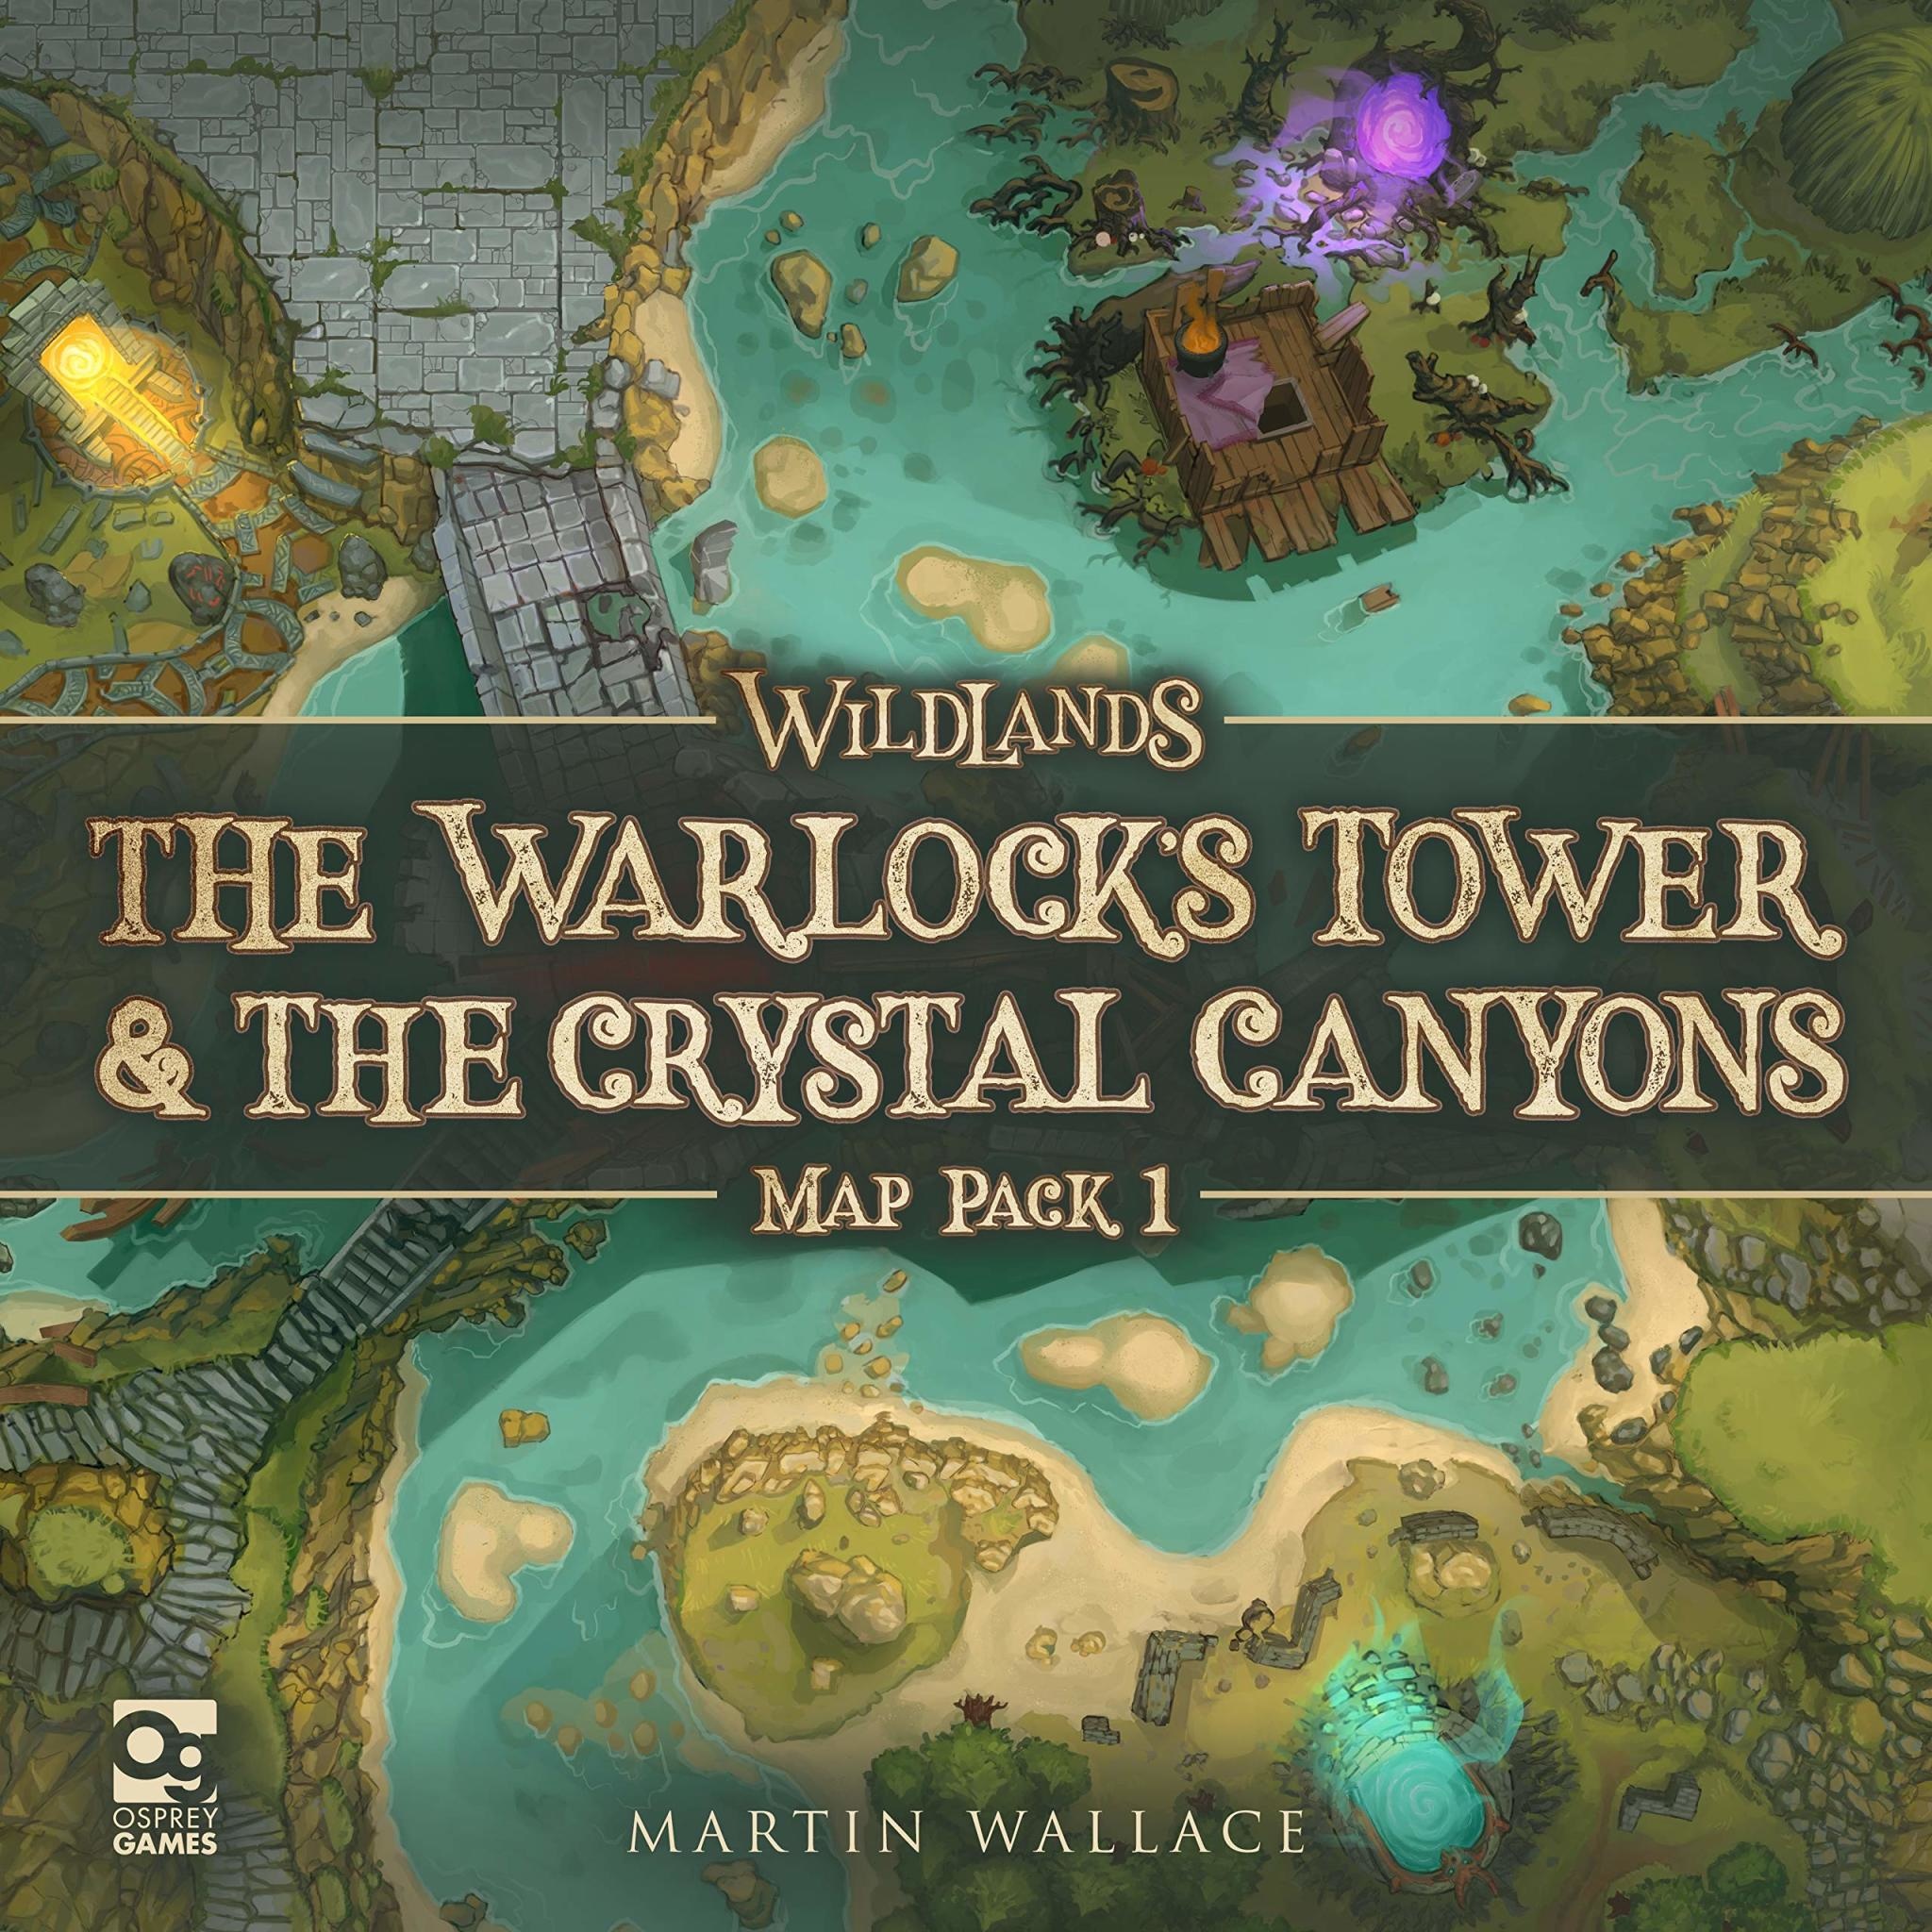 Wildlands: Map Pack 1 – The Warlock's Tower & The Crystal Canyons